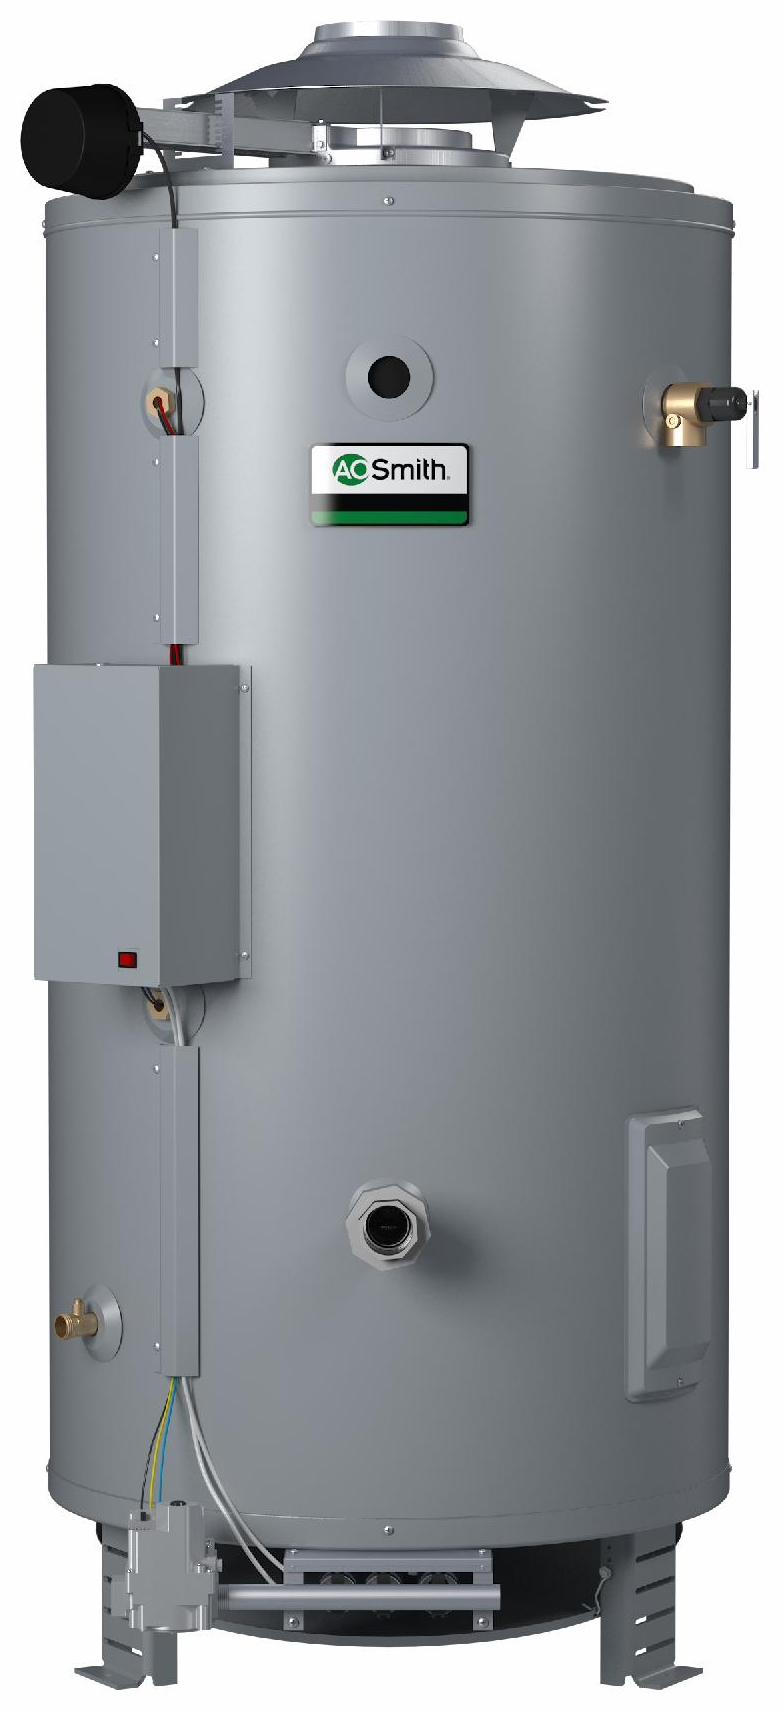 AO Smith BTR-365 Master-Fit 85 Gallon Commercial Natural Gas Water Heater -  3 Year Warranty